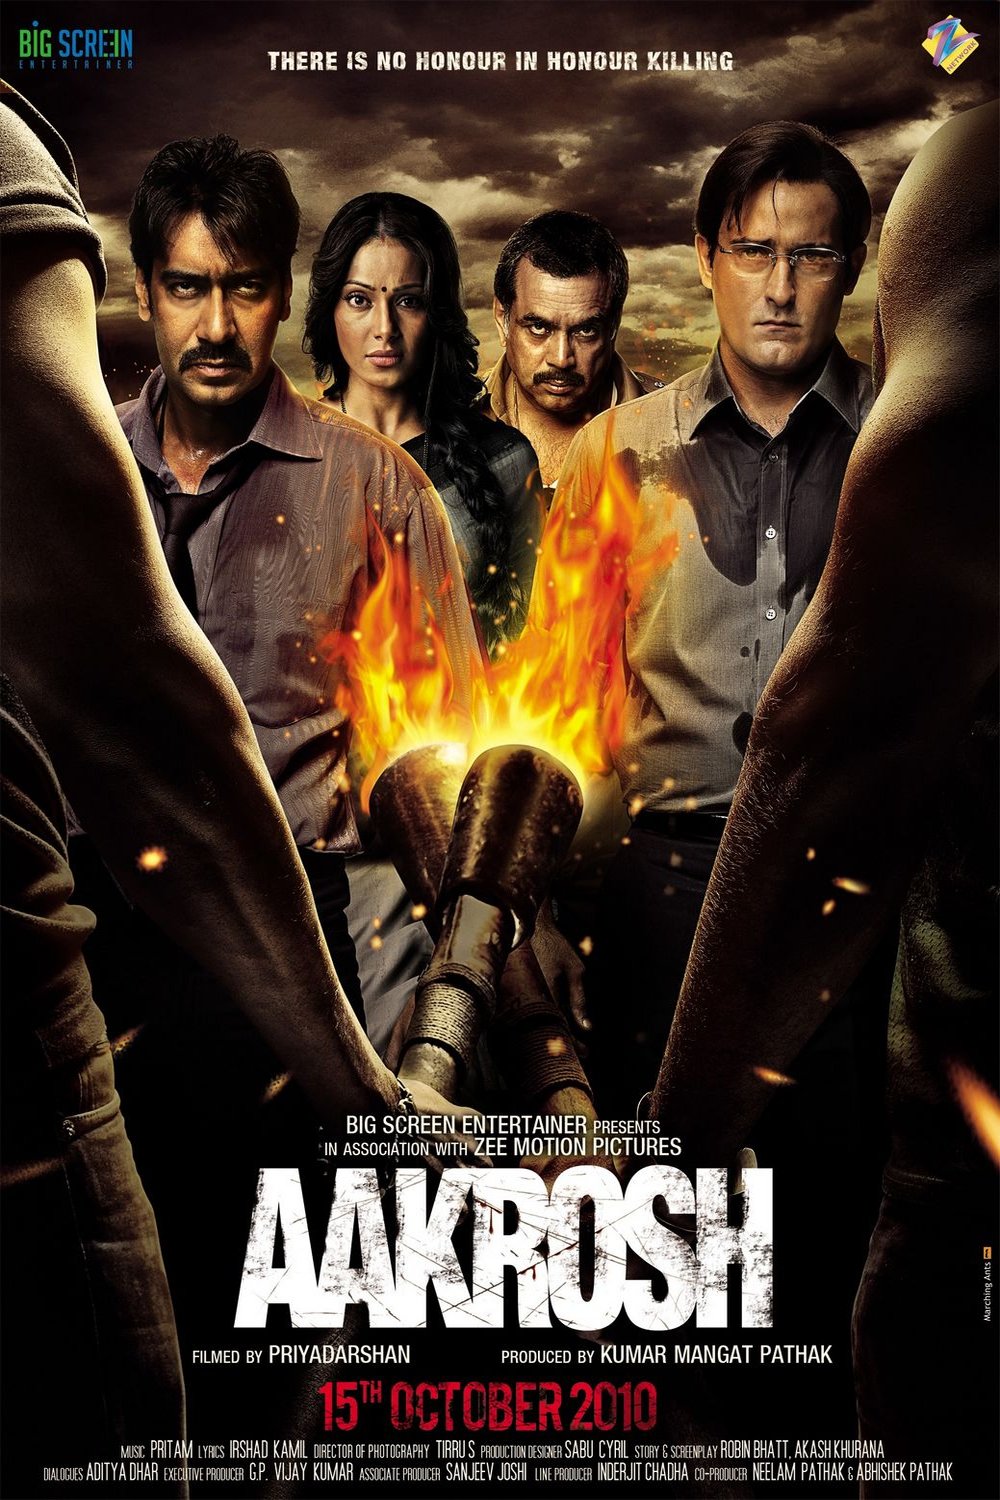 Poster of the movie Aakrosh